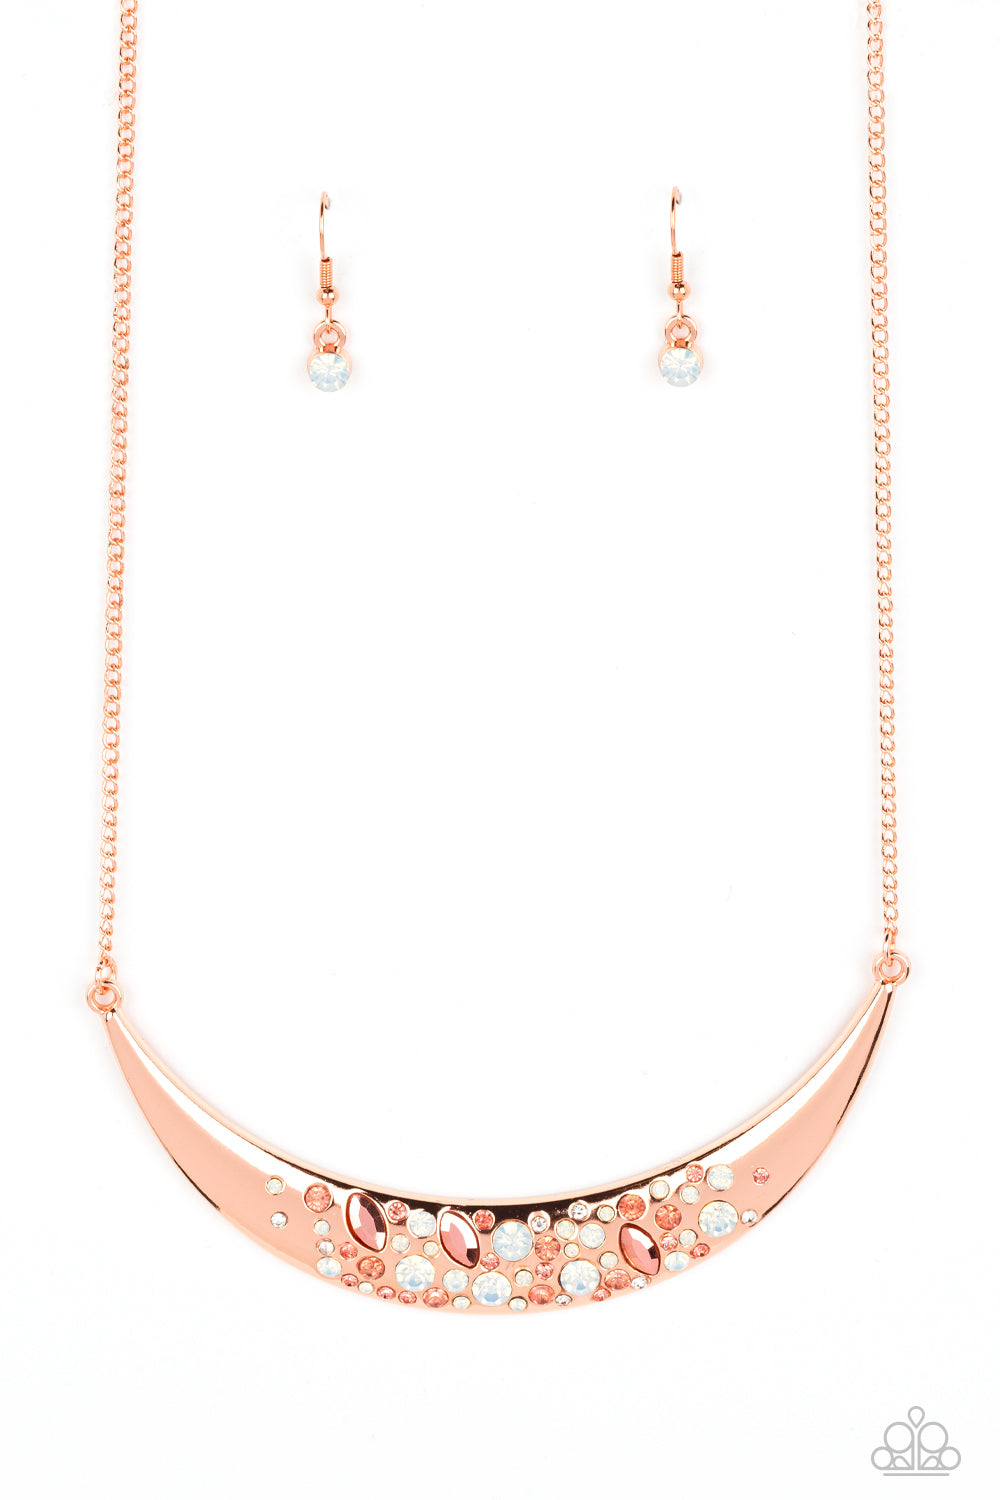 Bejeweled Baroness - copper - Paparazzi necklace